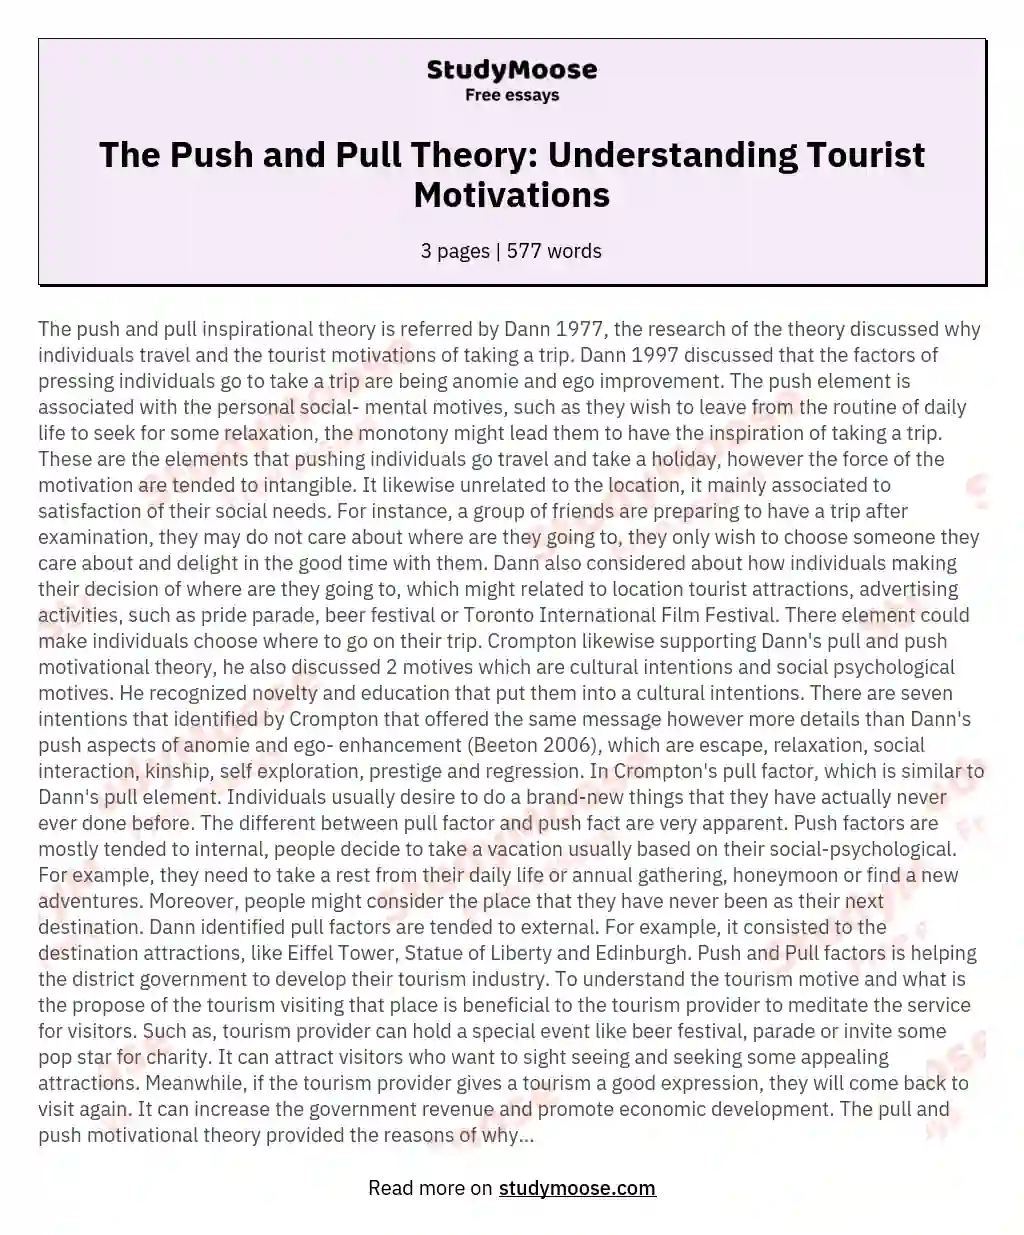 The Push and Pull Theory: Understanding Tourist Motivations essay